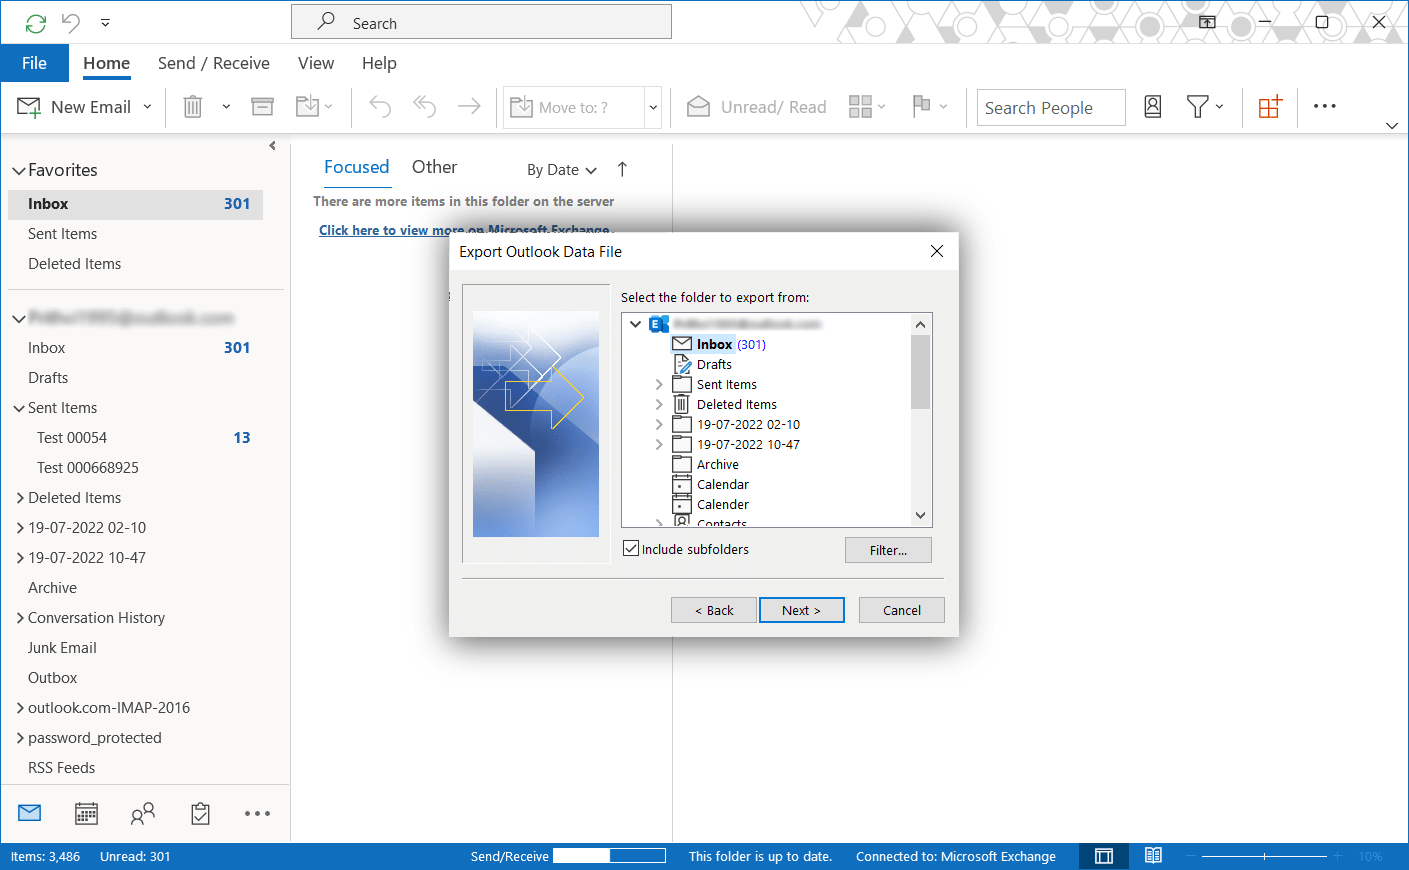 How to Move Outlook Folders From One Account to Another?